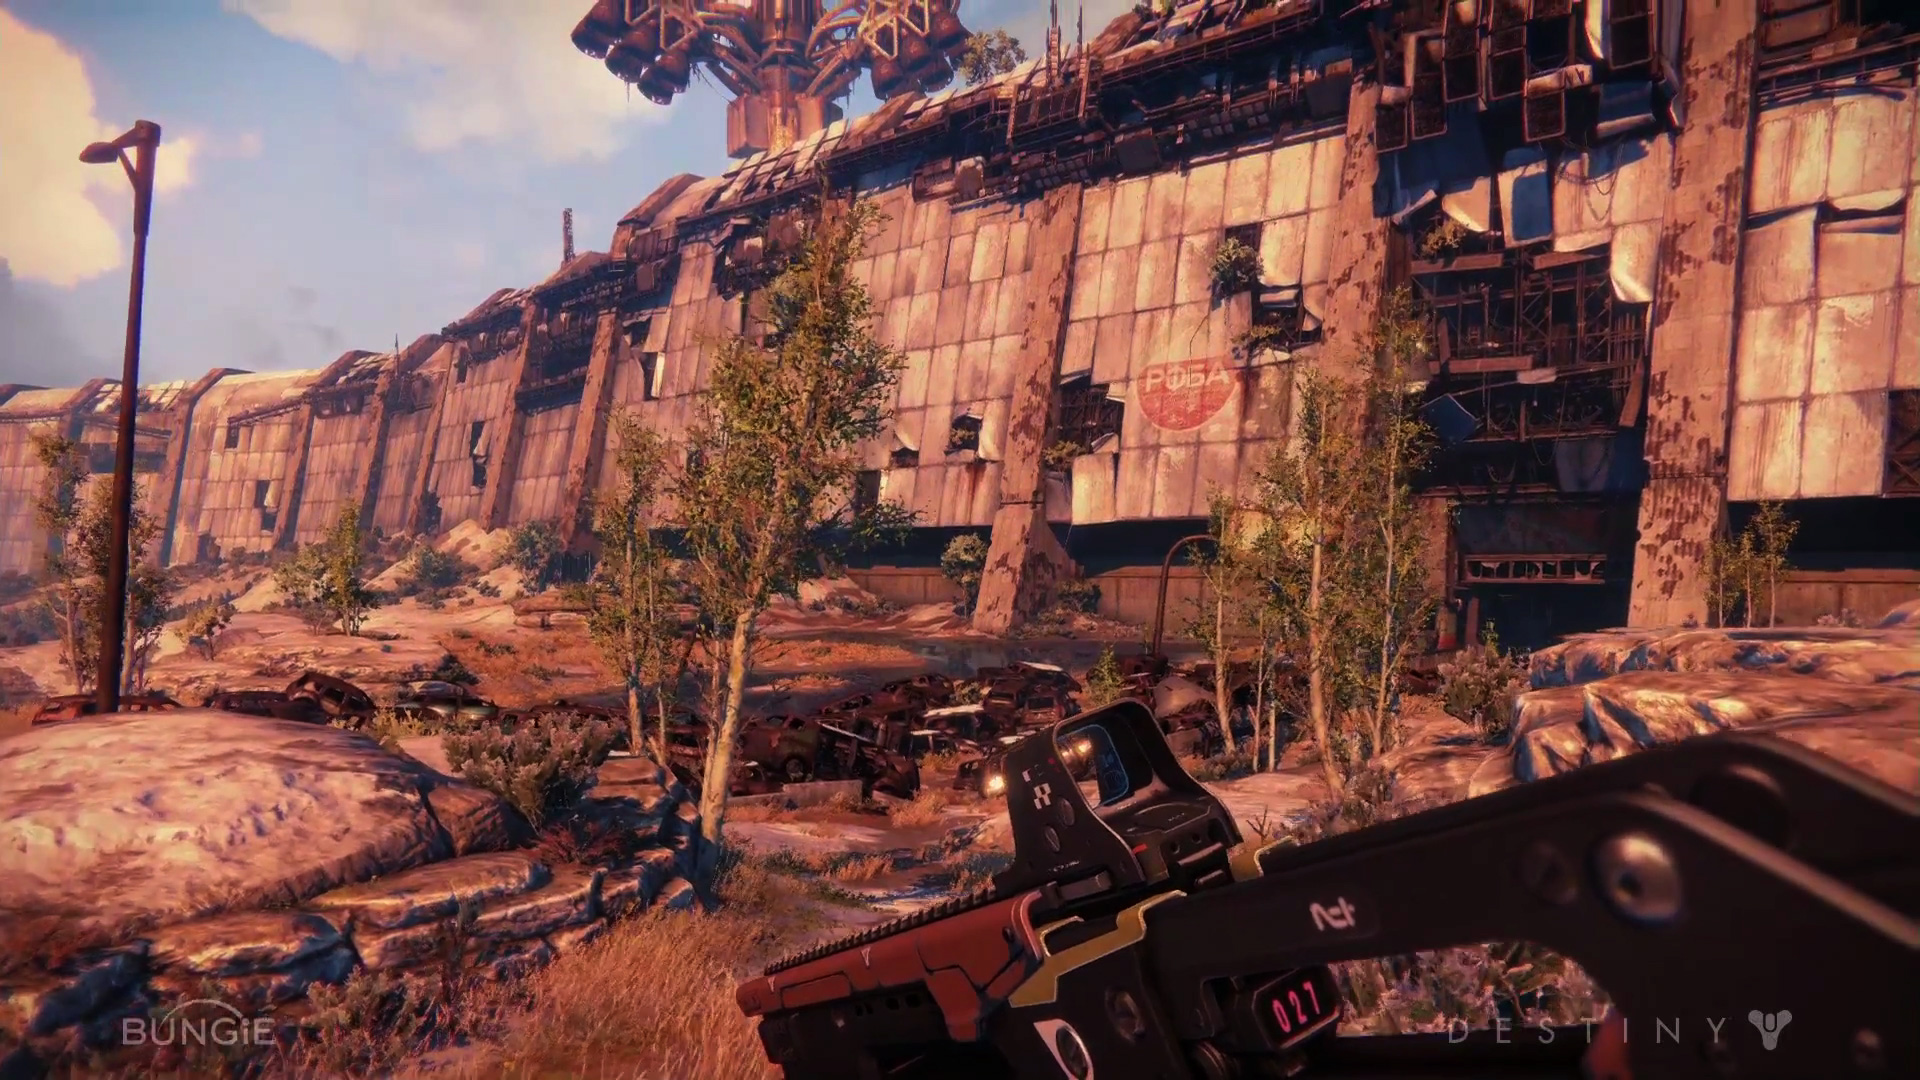 bungies-destiny-12-minutes-of-epic-gameplay-action-31.jpg